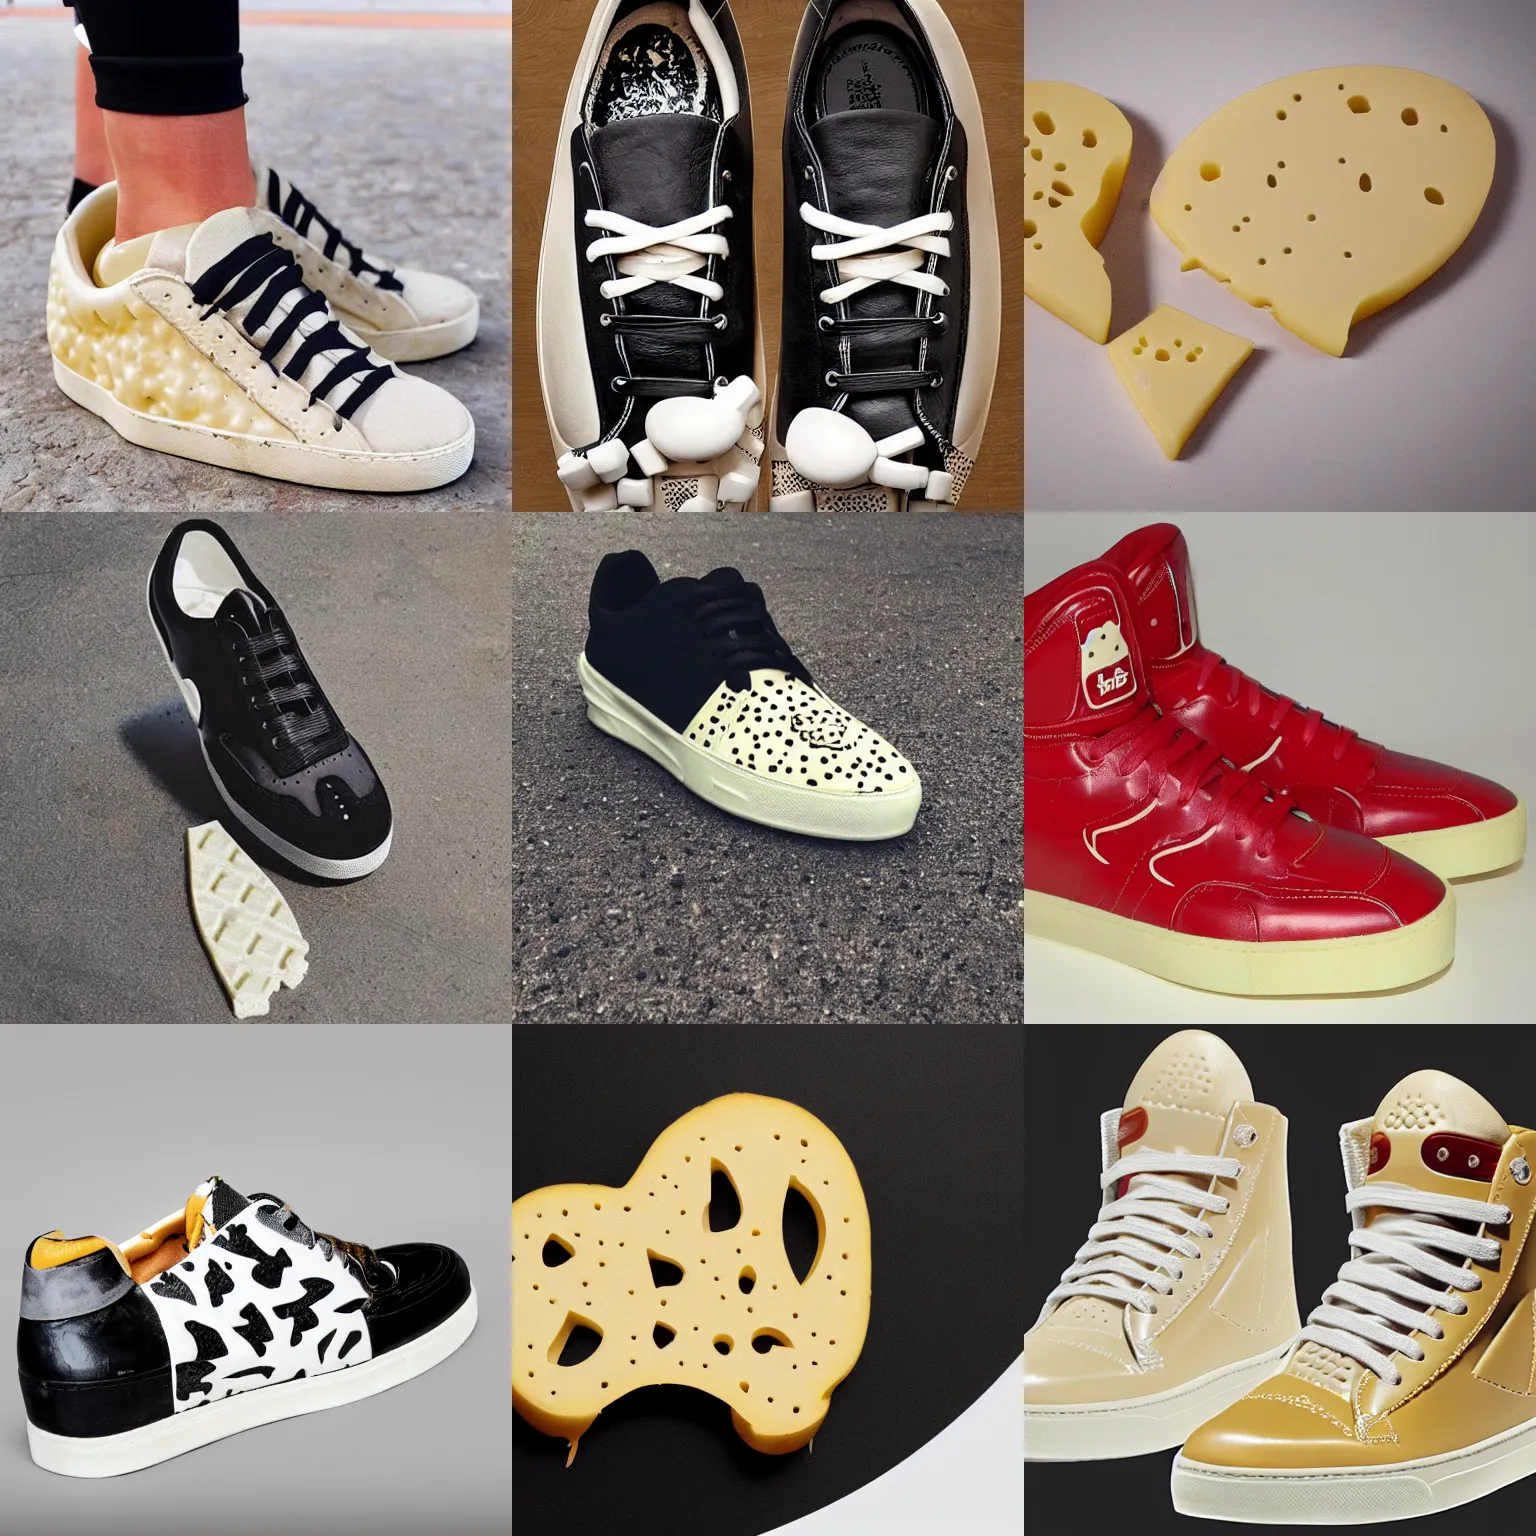 Prompt: Swiss cheese in the shape of a sneaker shoe